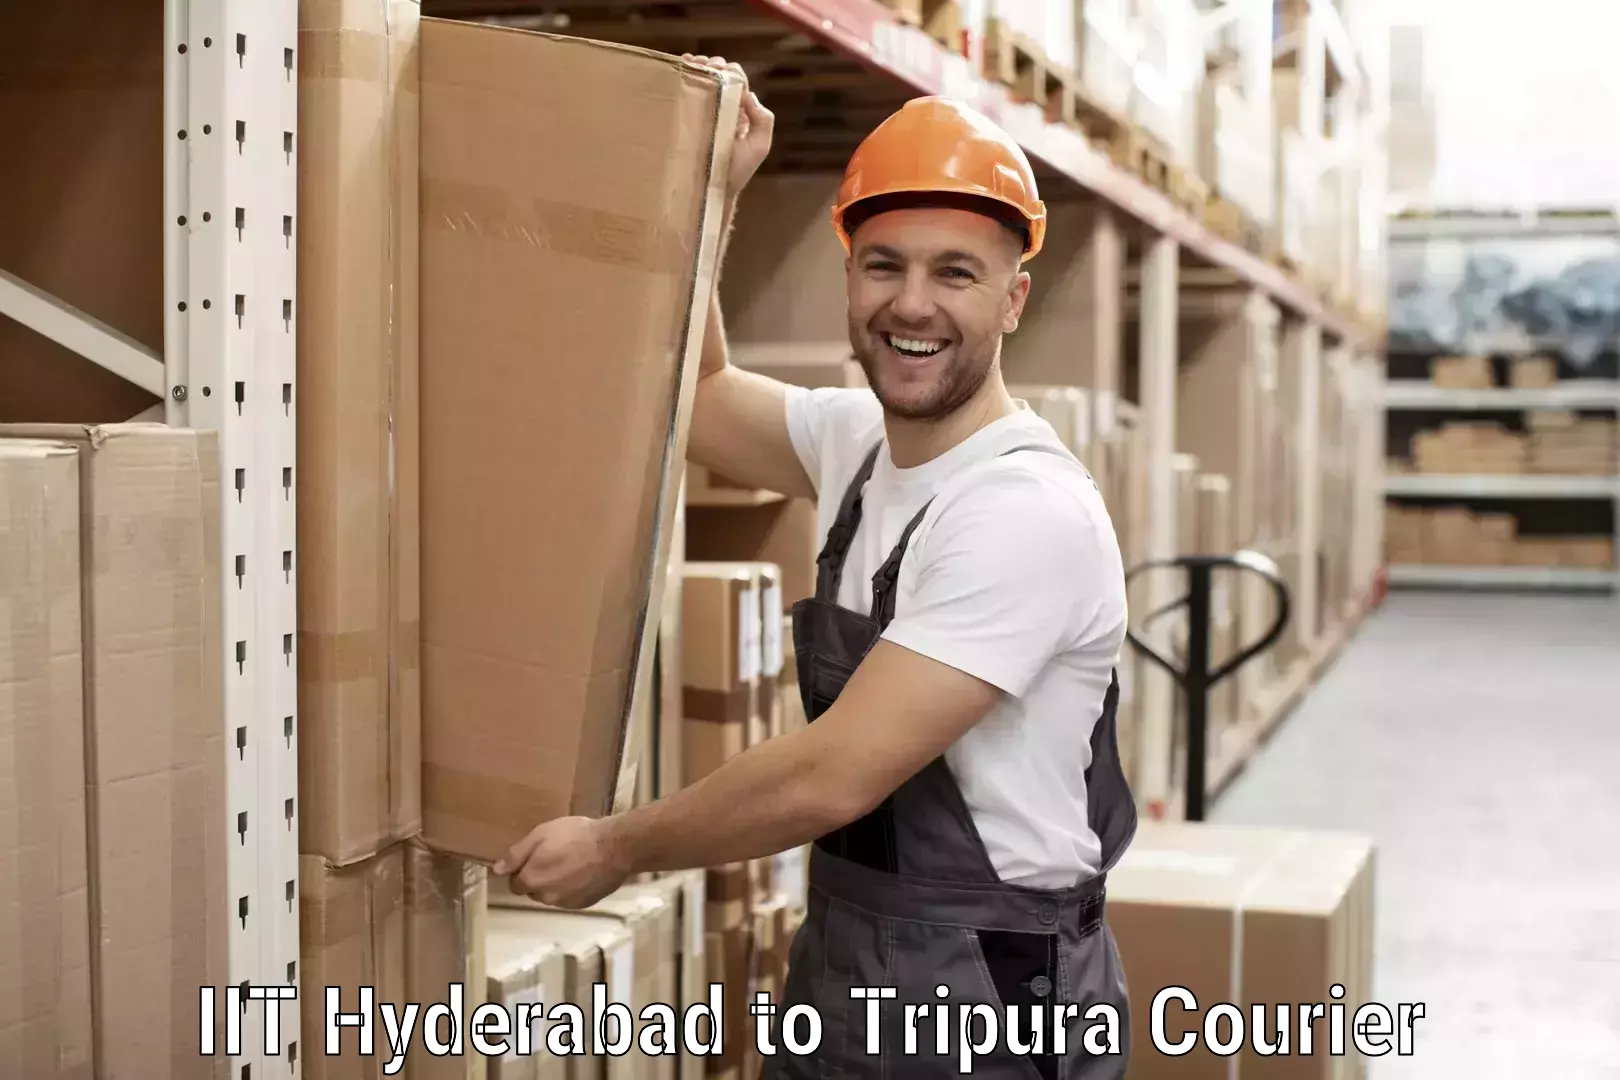 Quality courier services in IIT Hyderabad to Udaipur Tripura